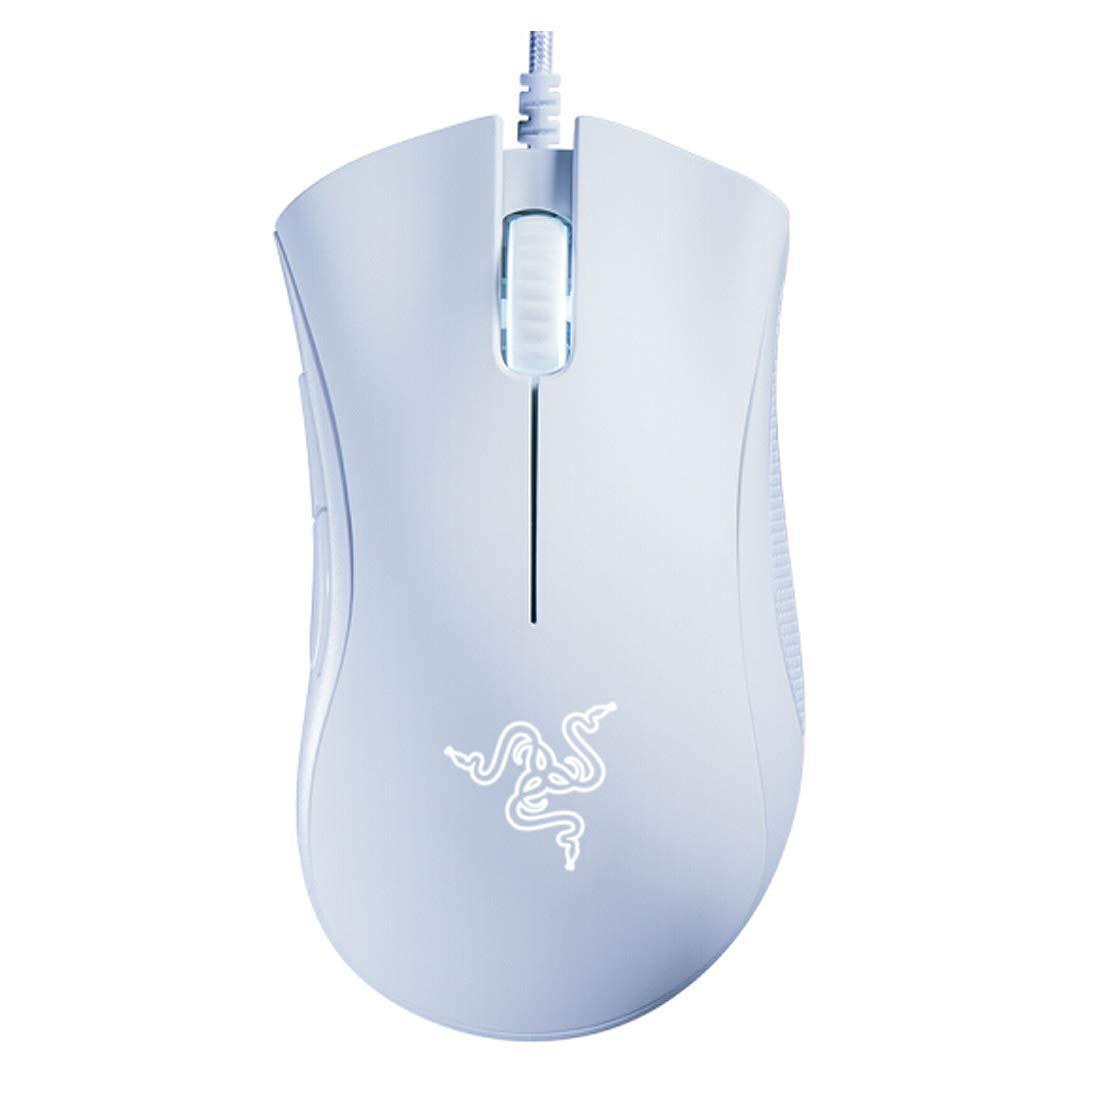 Razer DeathAdder Essential Gaming Mouse: 6400 DPI Optical Sensor - 5 Programmable Buttons - Mechanical Switches - Mercury White